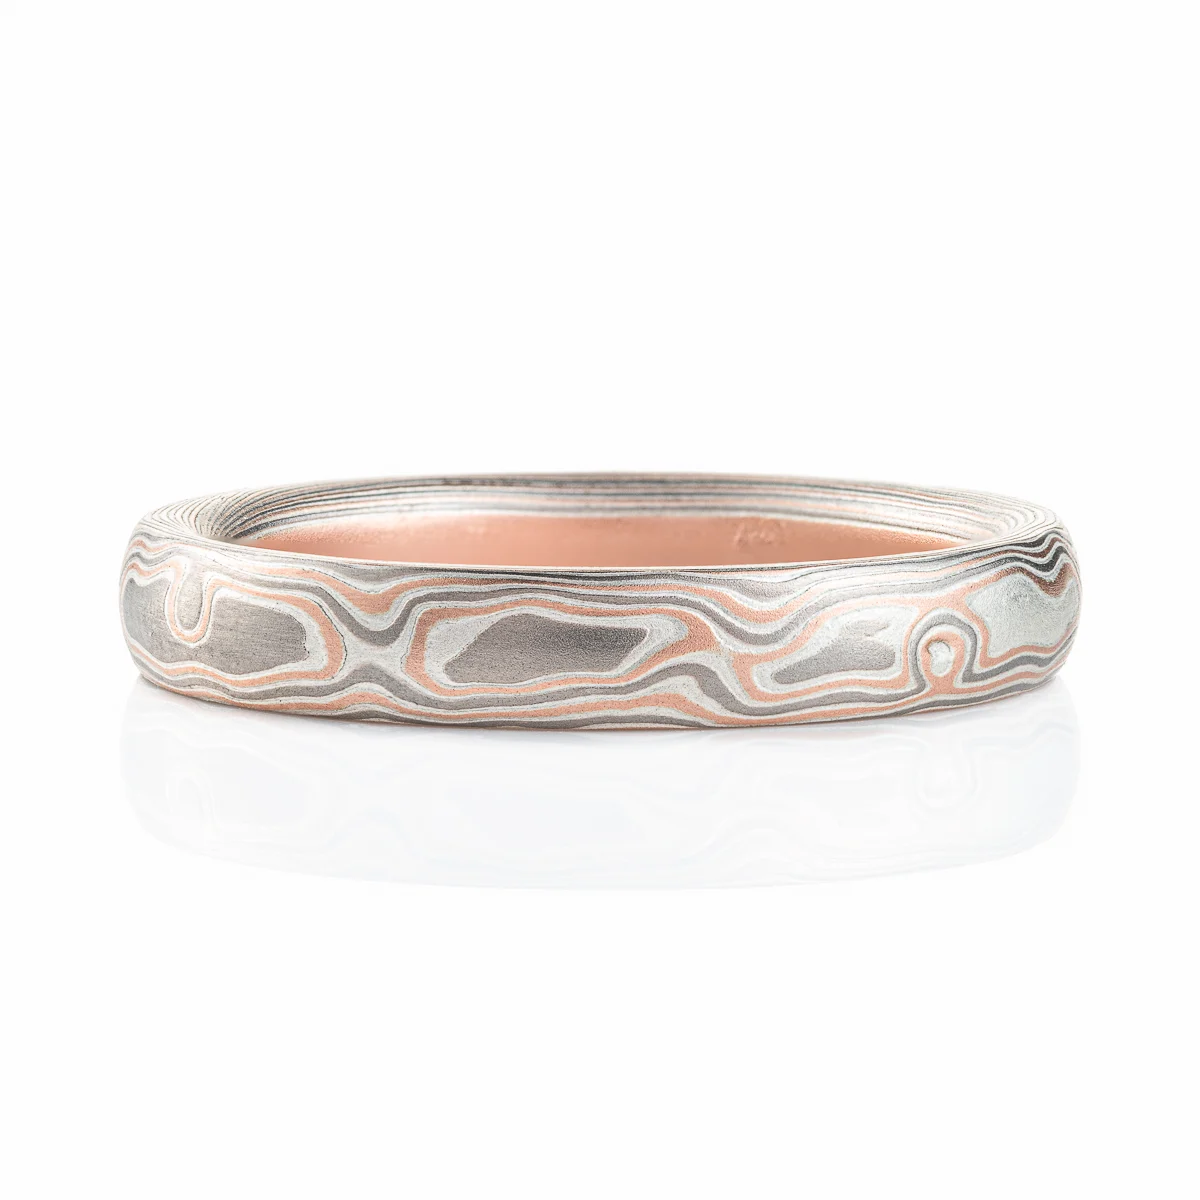 Light feeling narrow wedding band, made in a mokume woodgrain pattern with layers of red gold, palladium and silver, with a slight texture from an etched finish.